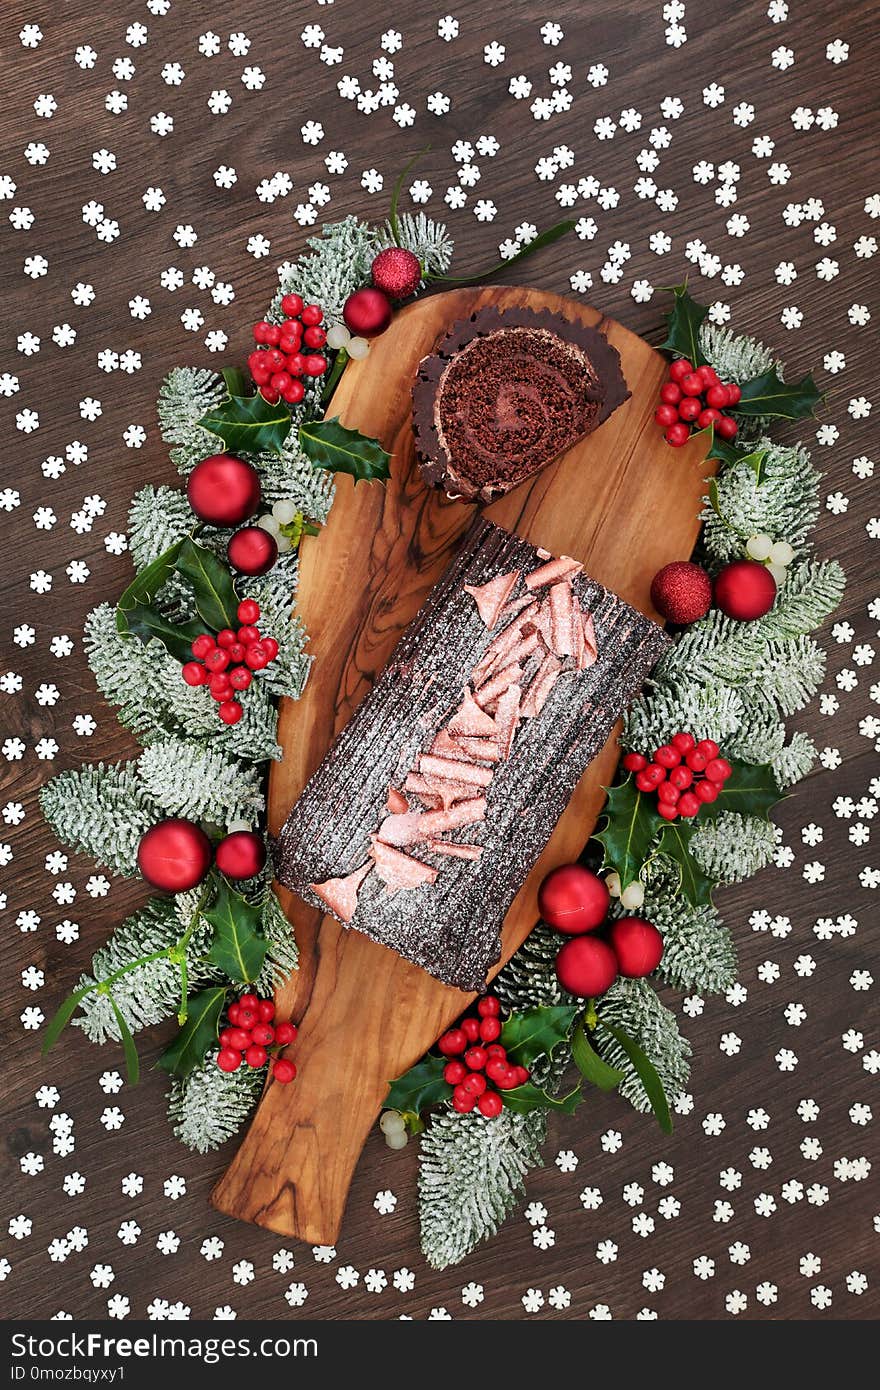 Chocolate log yule cake with winter flora of snow covered fir, holly and mistletoe on rustic wooden board and oak table background with snowflake sprinkles. Top view. Chocolate log yule cake with winter flora of snow covered fir, holly and mistletoe on rustic wooden board and oak table background with snowflake sprinkles. Top view.